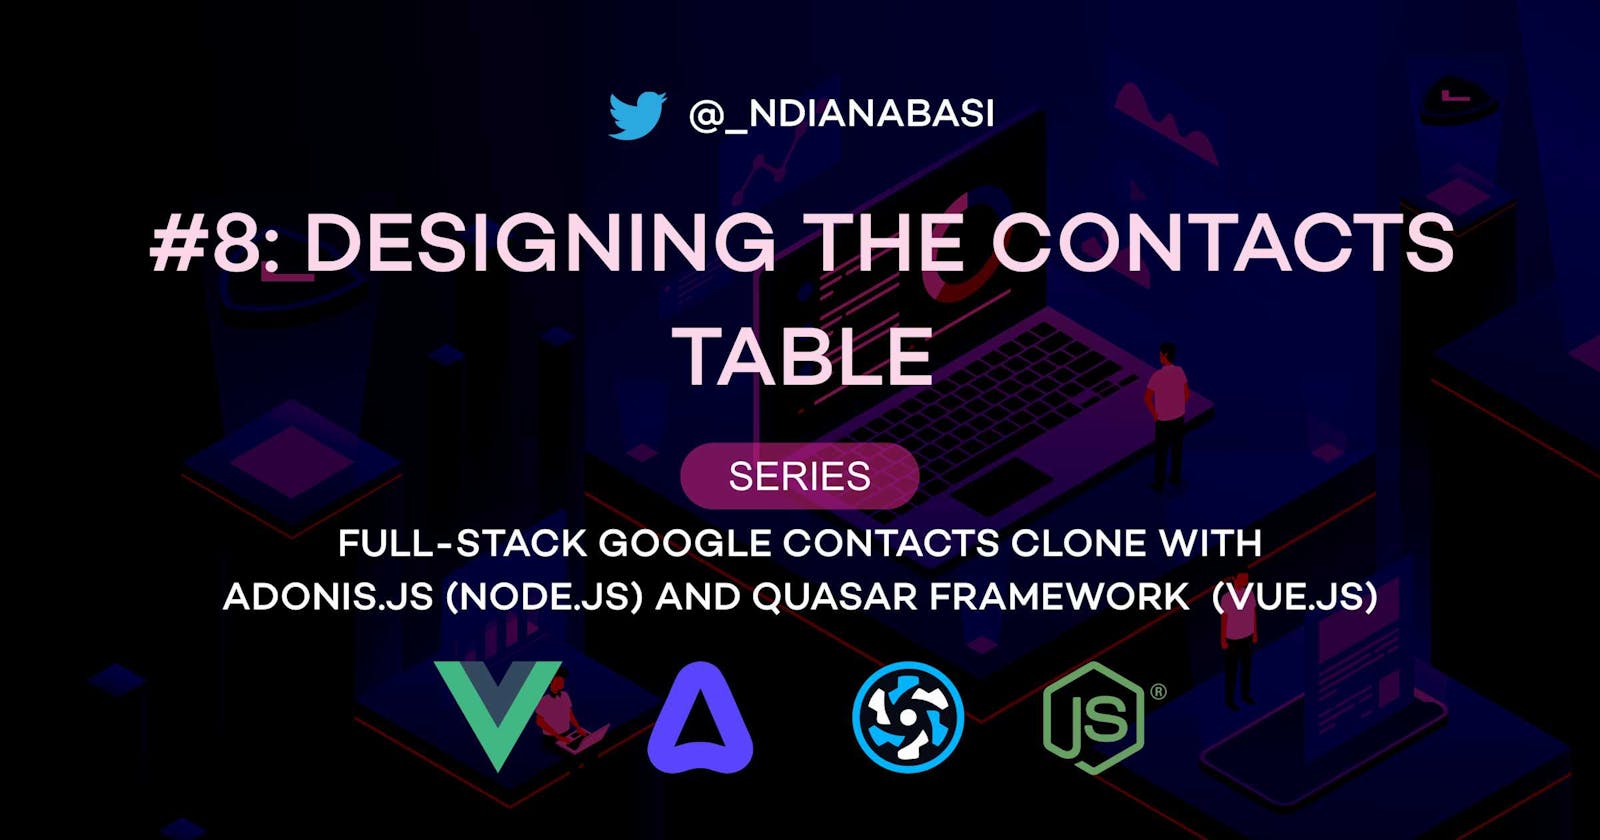 Designing the Contacts Table | Full-Stack Google Contacts Clone with Adonis.js/Node.js and Quasar (Vue.js)